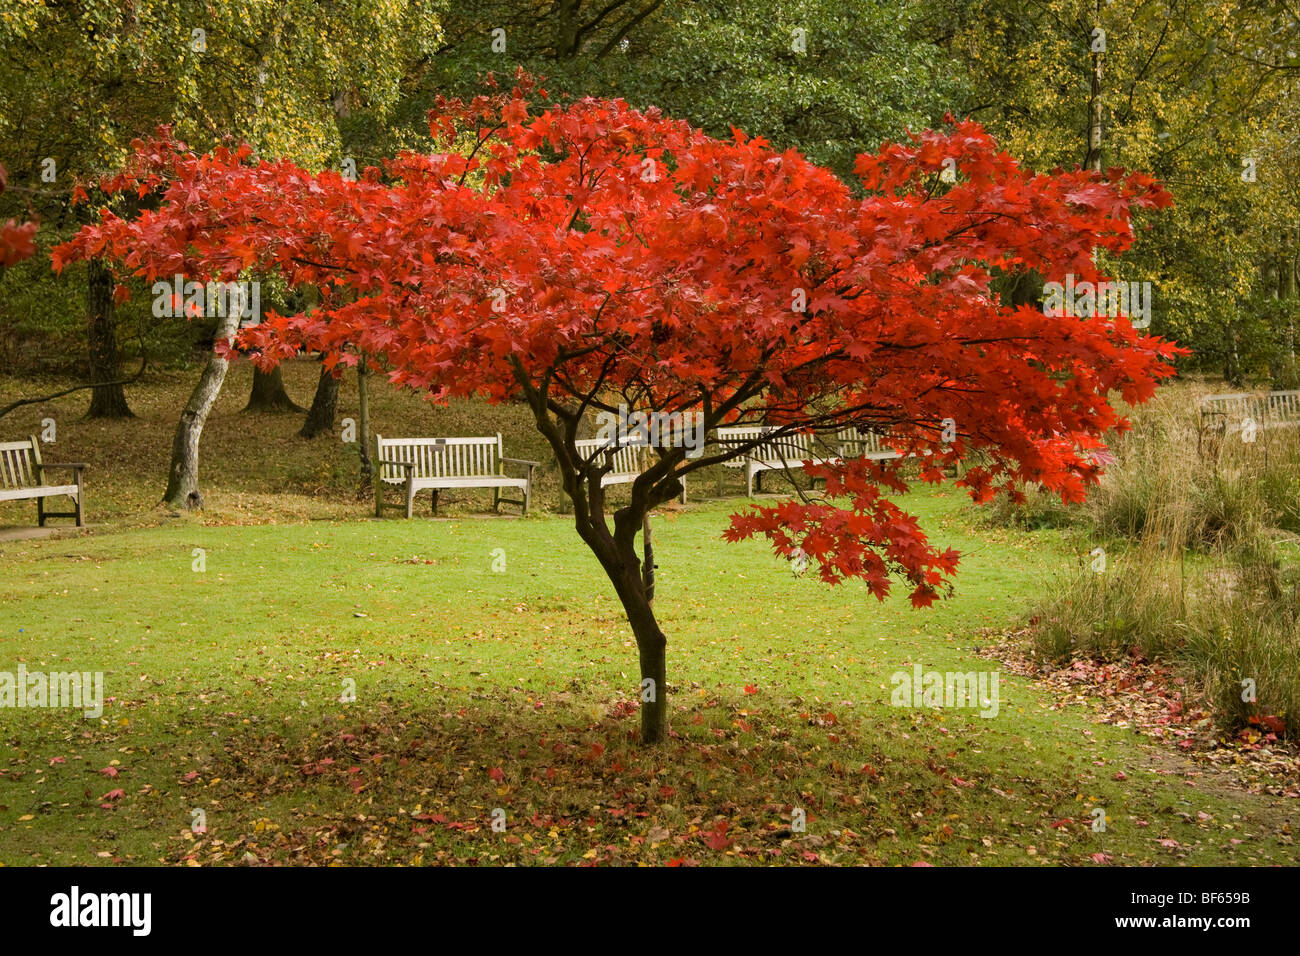 Red Leaved Japanese Maple Tree in a park Stock Photo